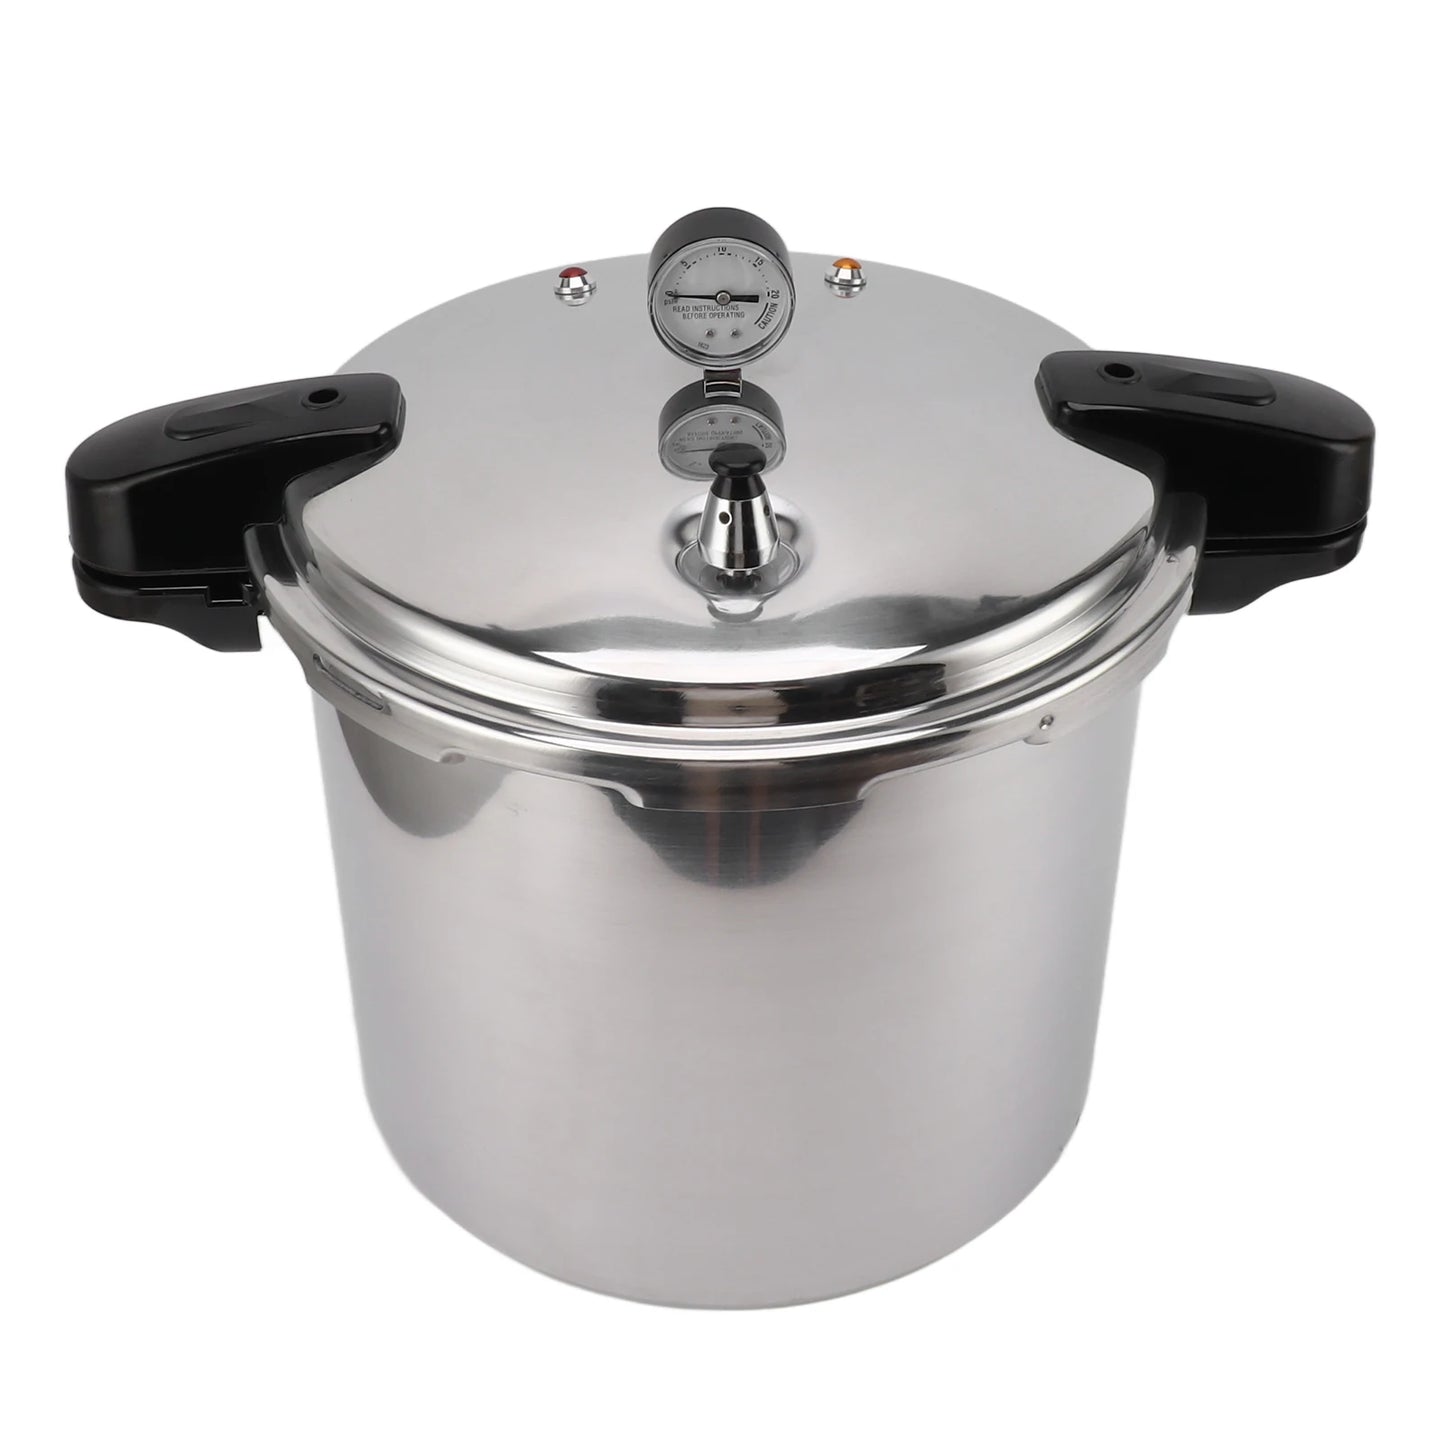 32cm Pressure Cooker Large Capacity Aluminium Alloy Canner with Pressure Gage